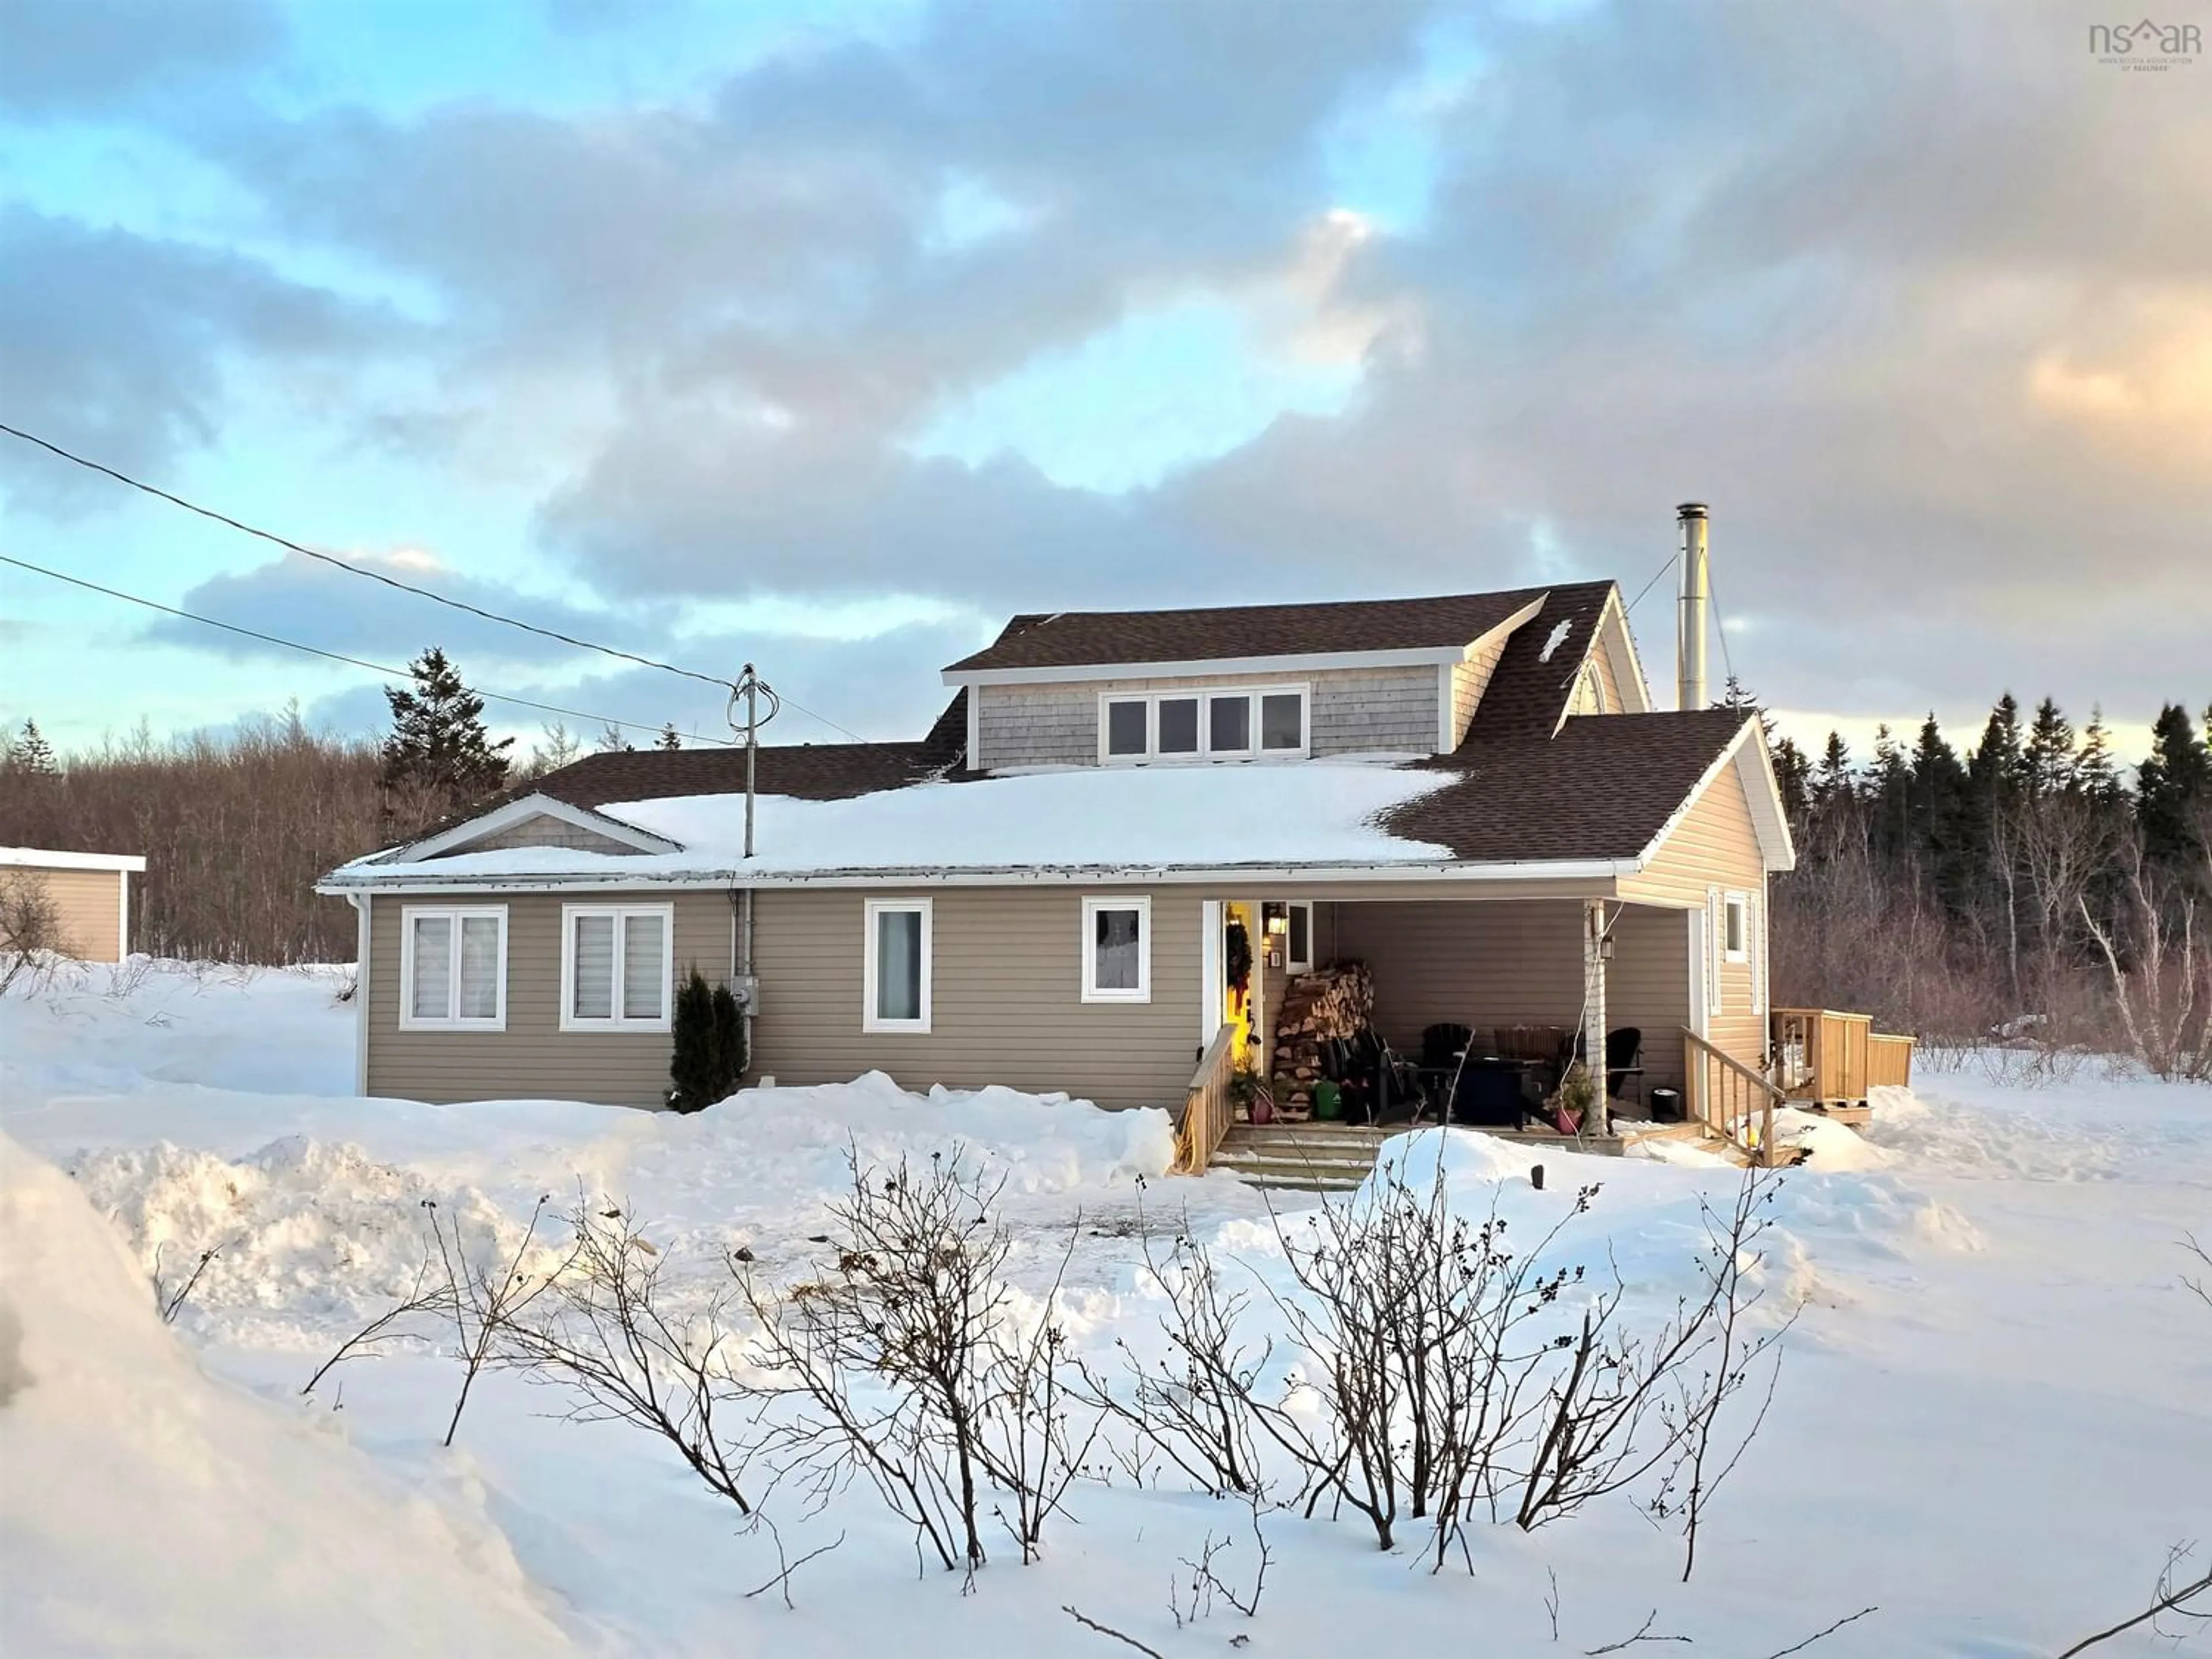 Home with unknown exterior material for 18 Cooks Lane, Victoria Mines Nova Scotia B1N 3J6